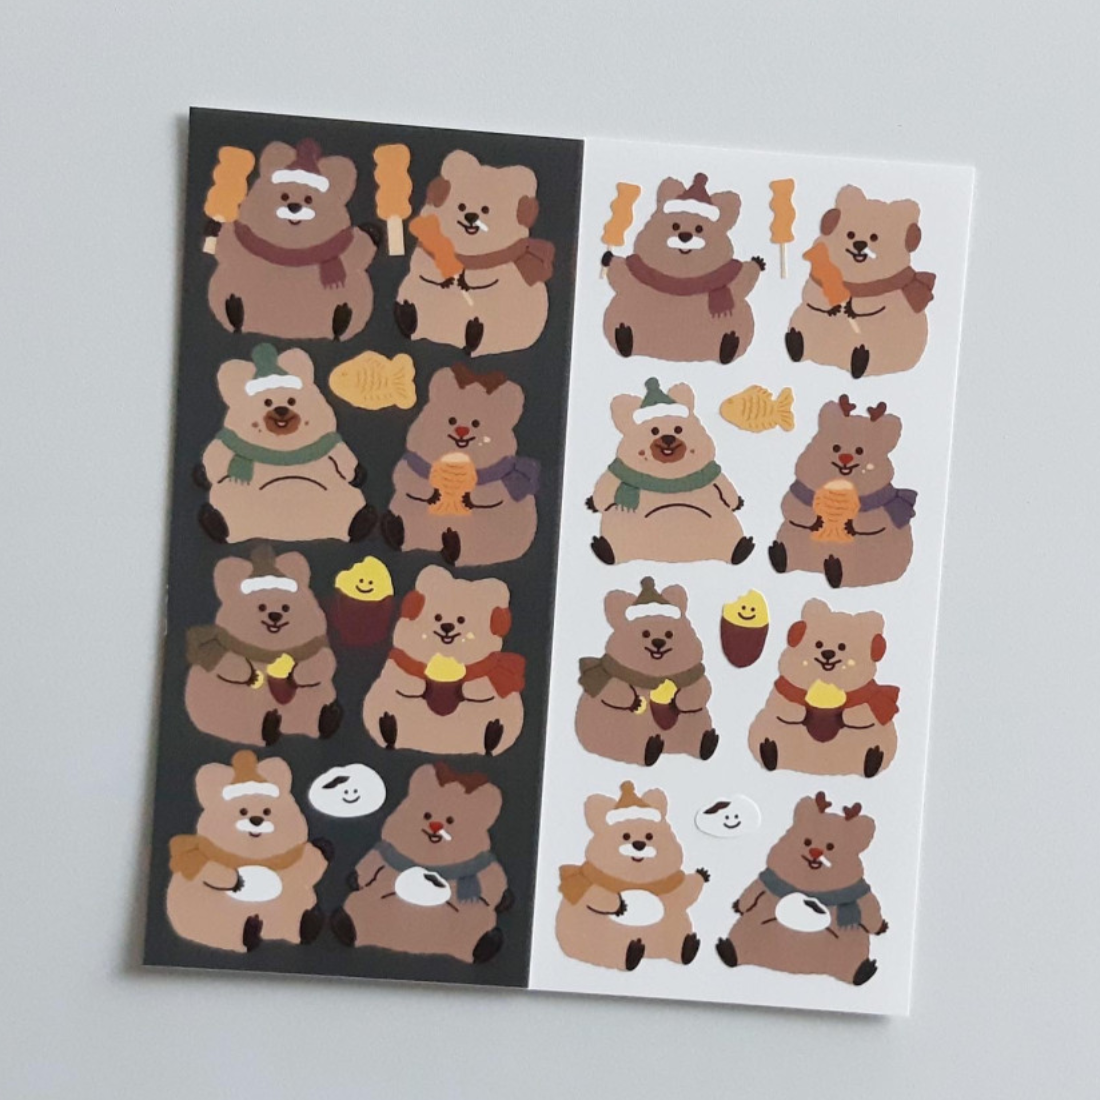 [YOUNG FOREST] Quokka Sticker (Winter Edition)